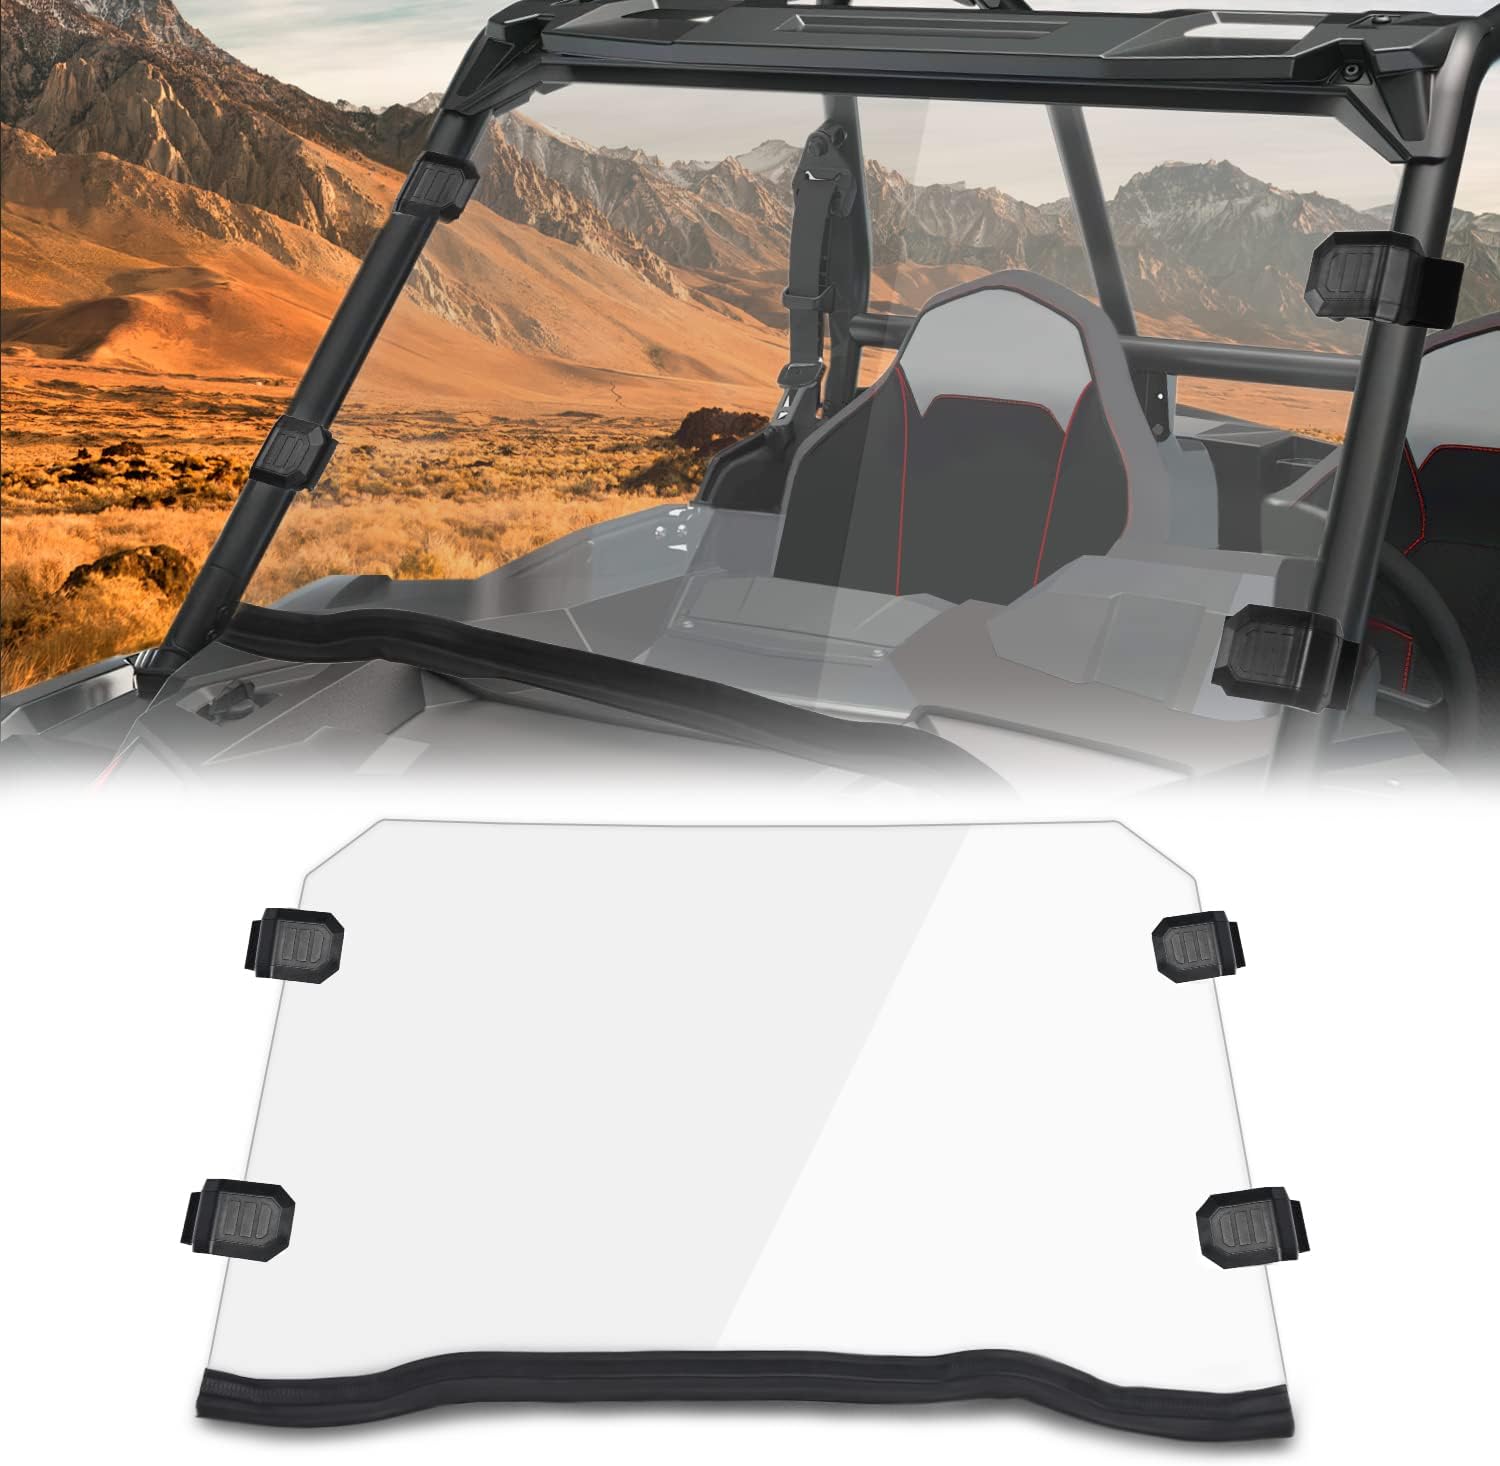 Front Full Windshield RZR 1000 Windshield Fit For 2014 2015 2016 2017 2018 Polaris RZR XP Turbo / XP 4 Turbo / XP Turbo EPS/ RZR XP 1000 / XP 1000 EPS / XP 4 1000 / XP 4 1000 EPS/ RZR 900